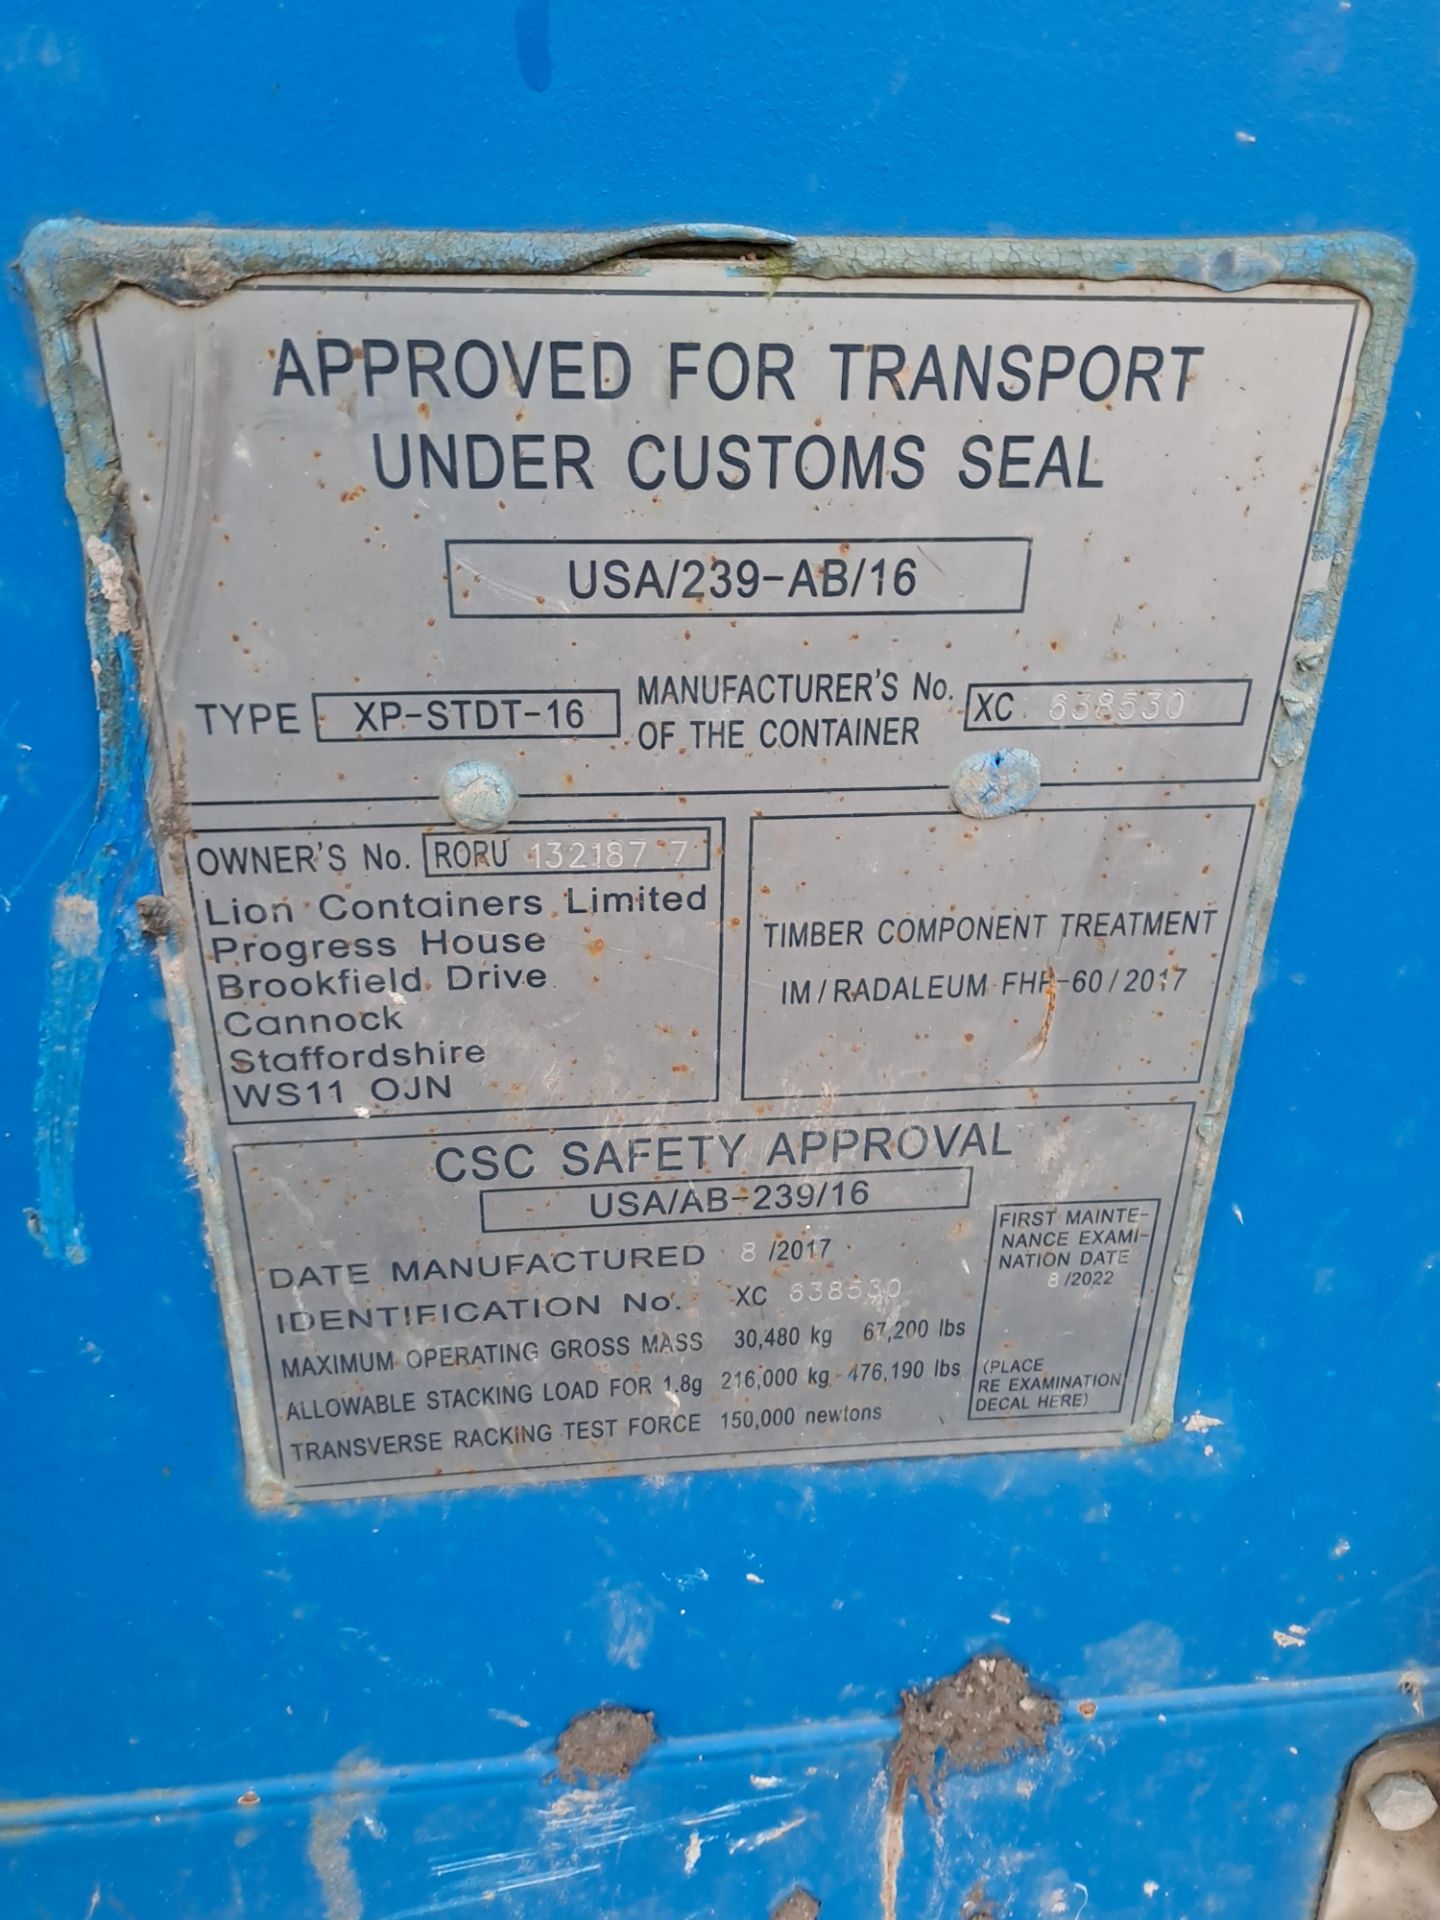 Lions Containers XP-STDT-16 20ft shipping container, serial no. XC 638530, year 2017 - Image 3 of 3